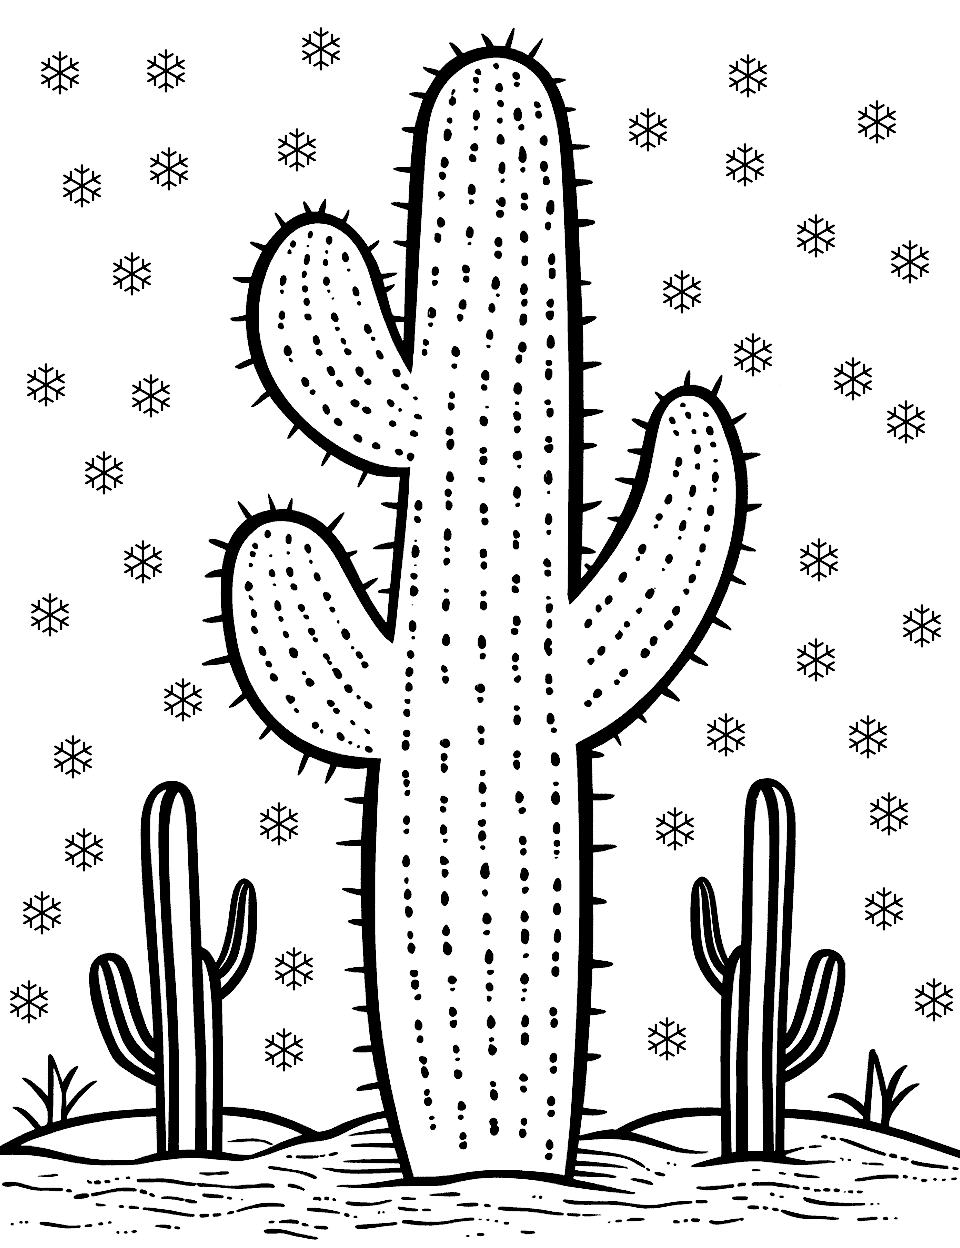 Cactus in a Winter Scene Coloring Page - A unique scene of a cactus with snowflakes falling around it, showcasing a desert winter.